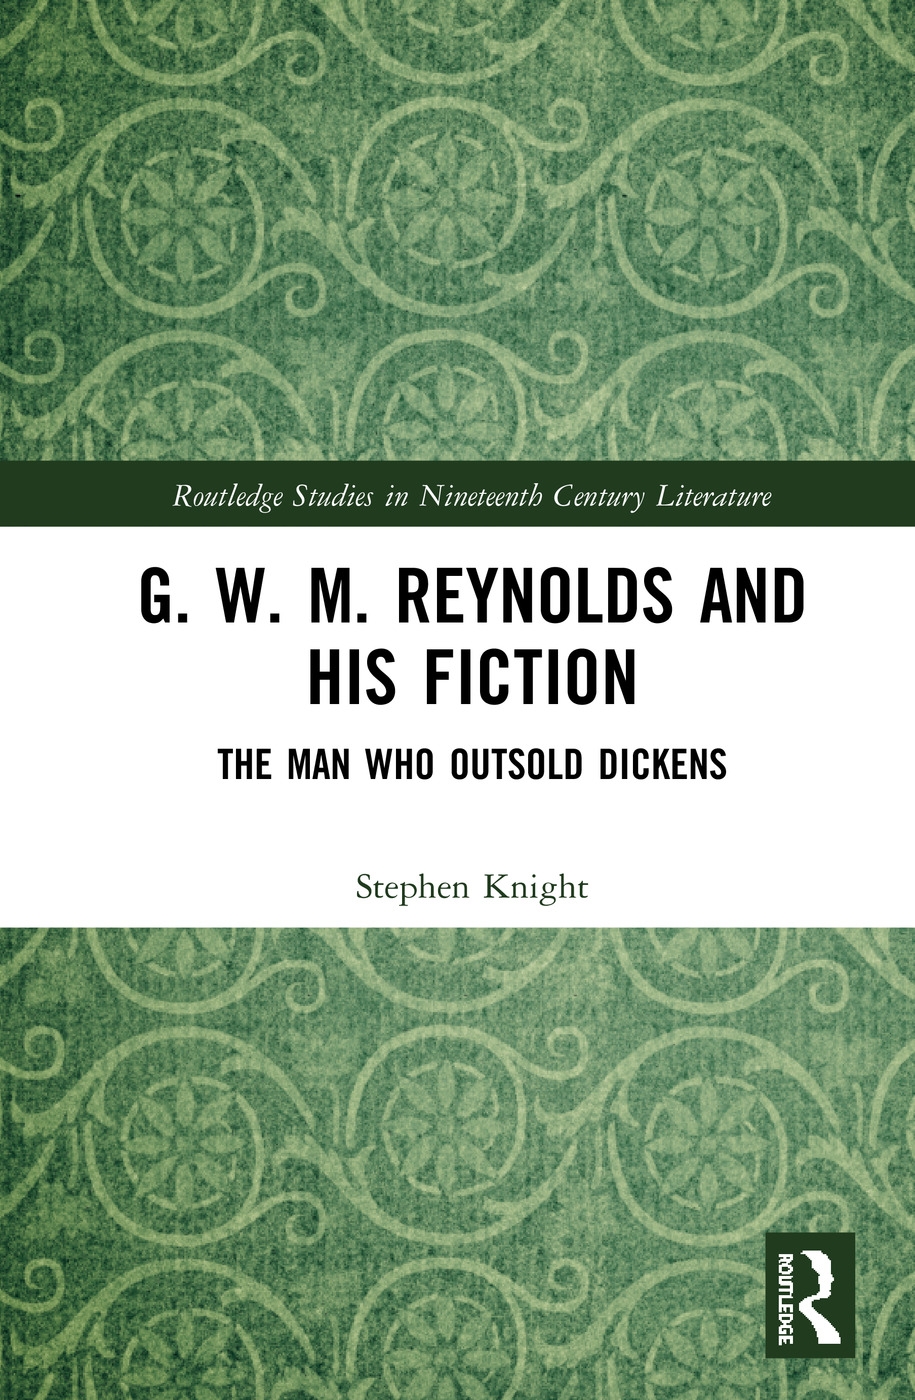 G. W. M. Reynolds and His Fiction: The Man Who Outsold Dickens